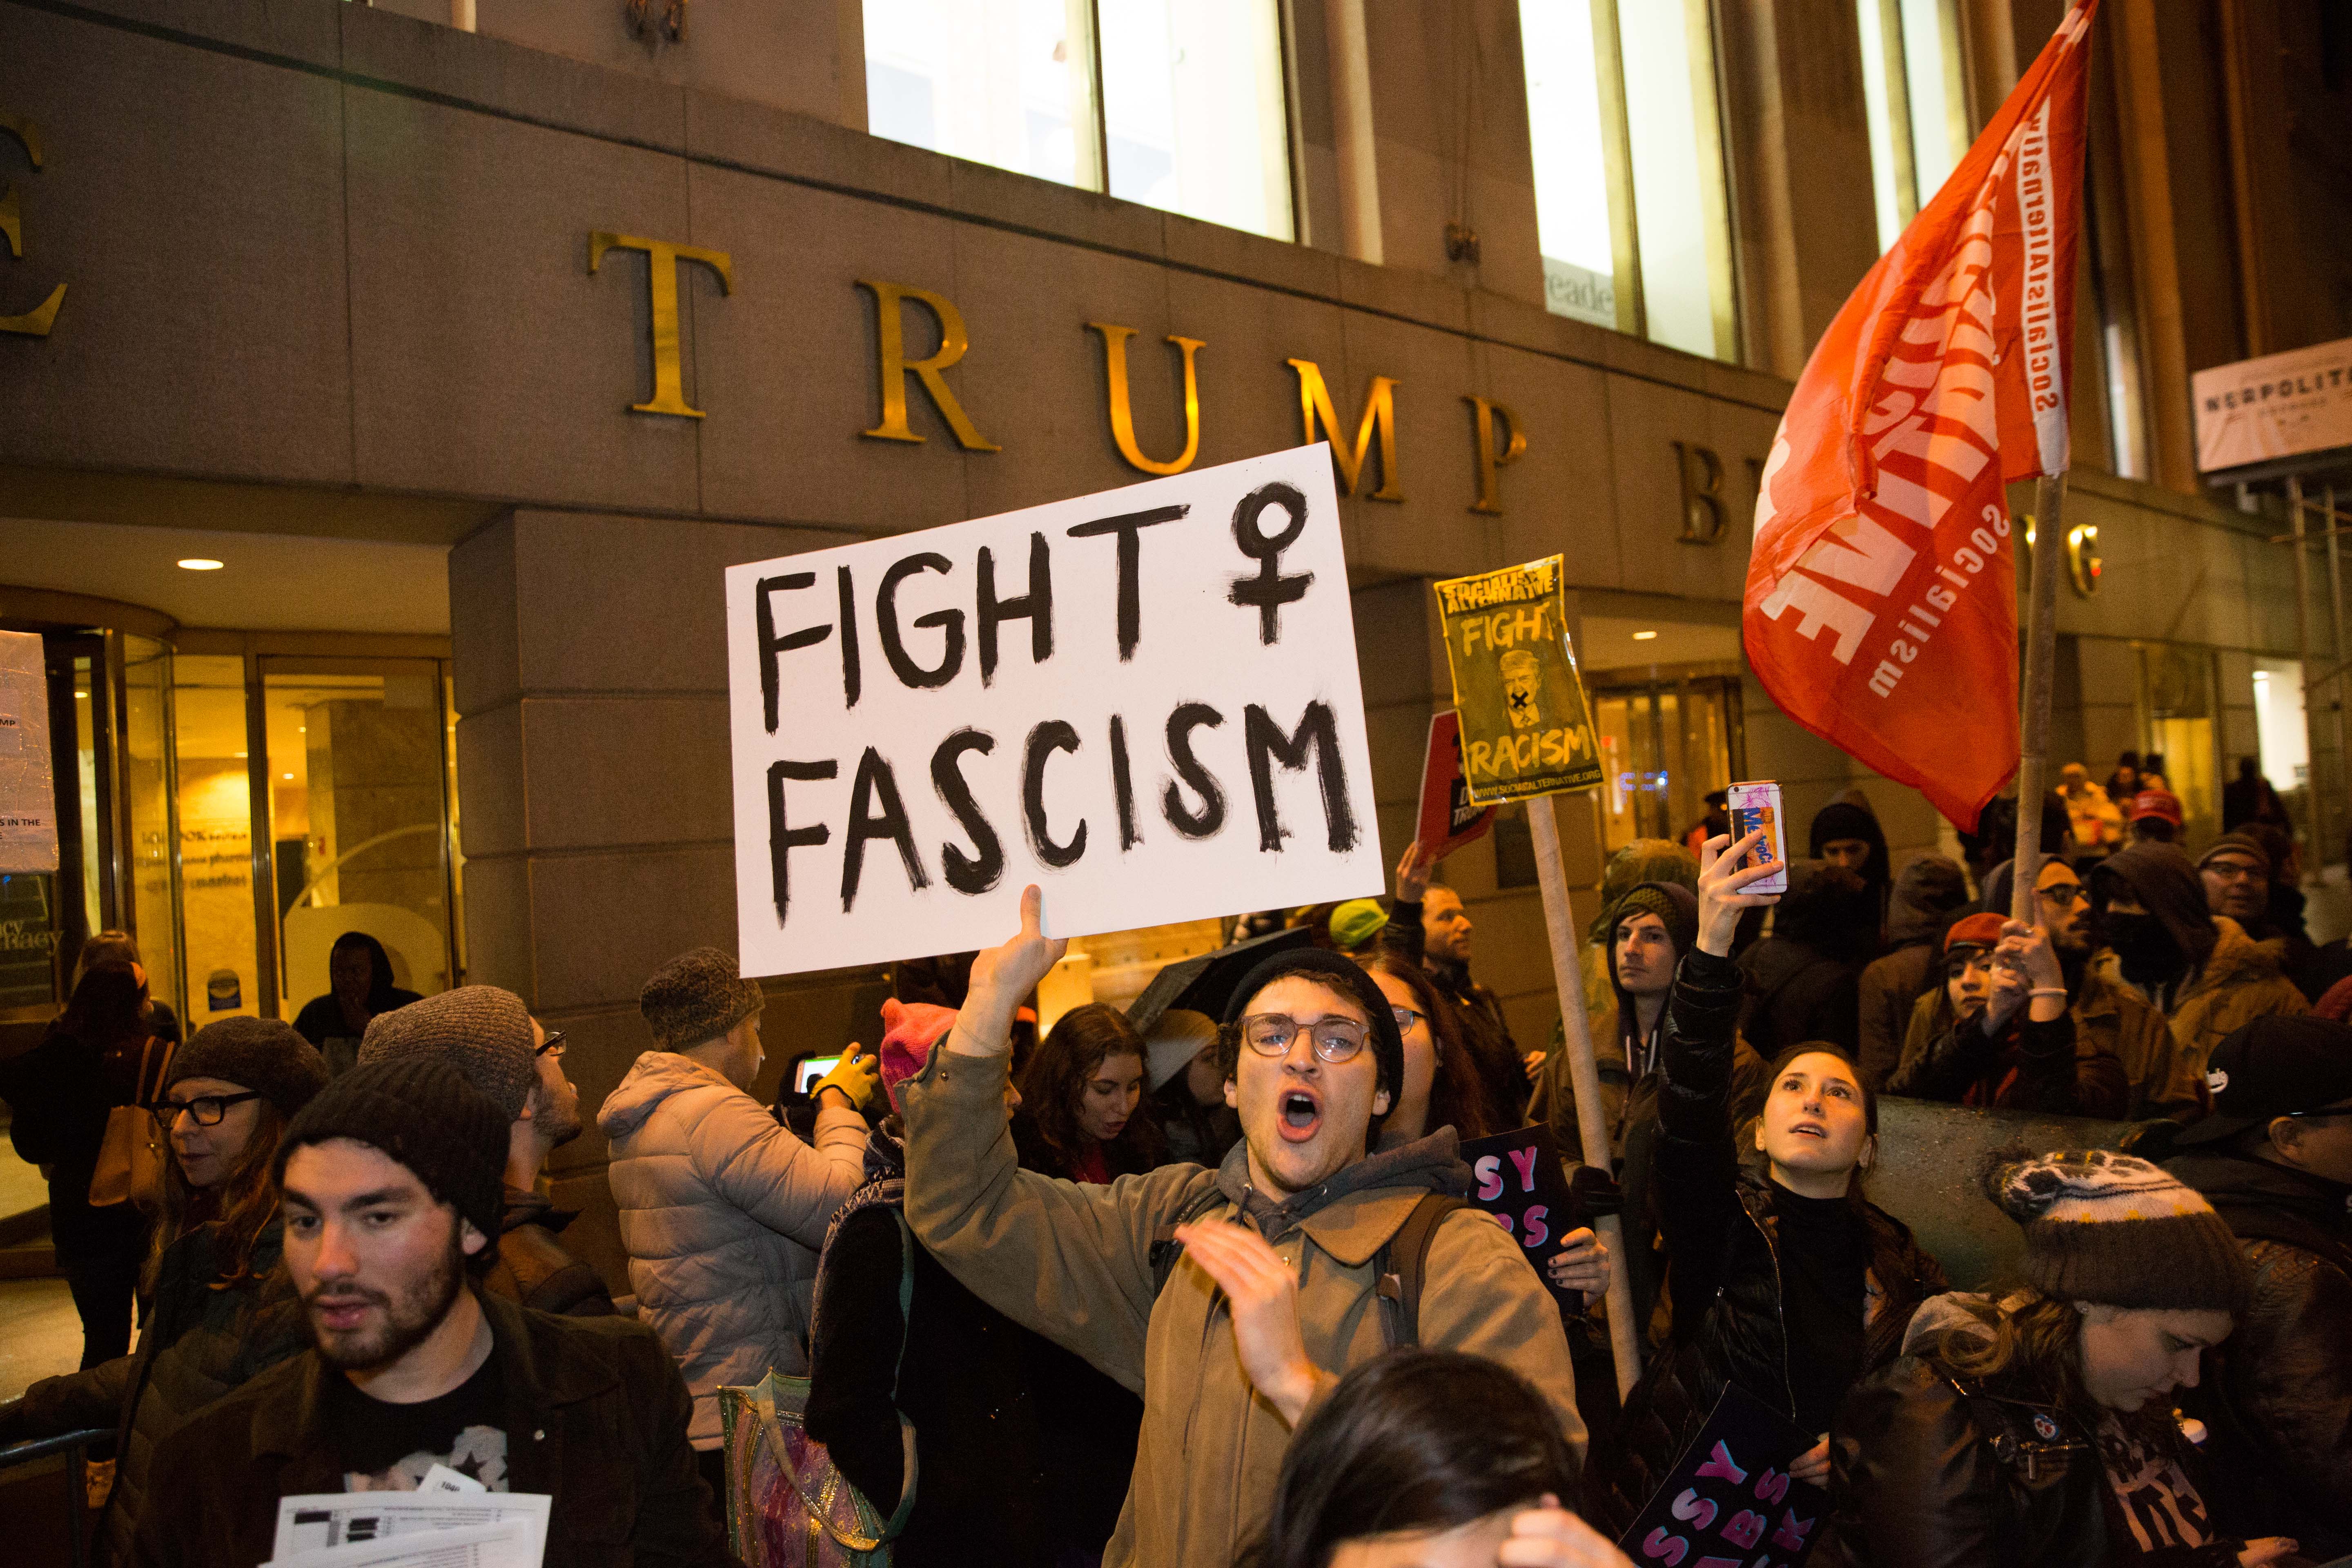 Activists gather in front of the Trump Building during the Stand Against Trump rally and march on 20 January 2017 in New York City